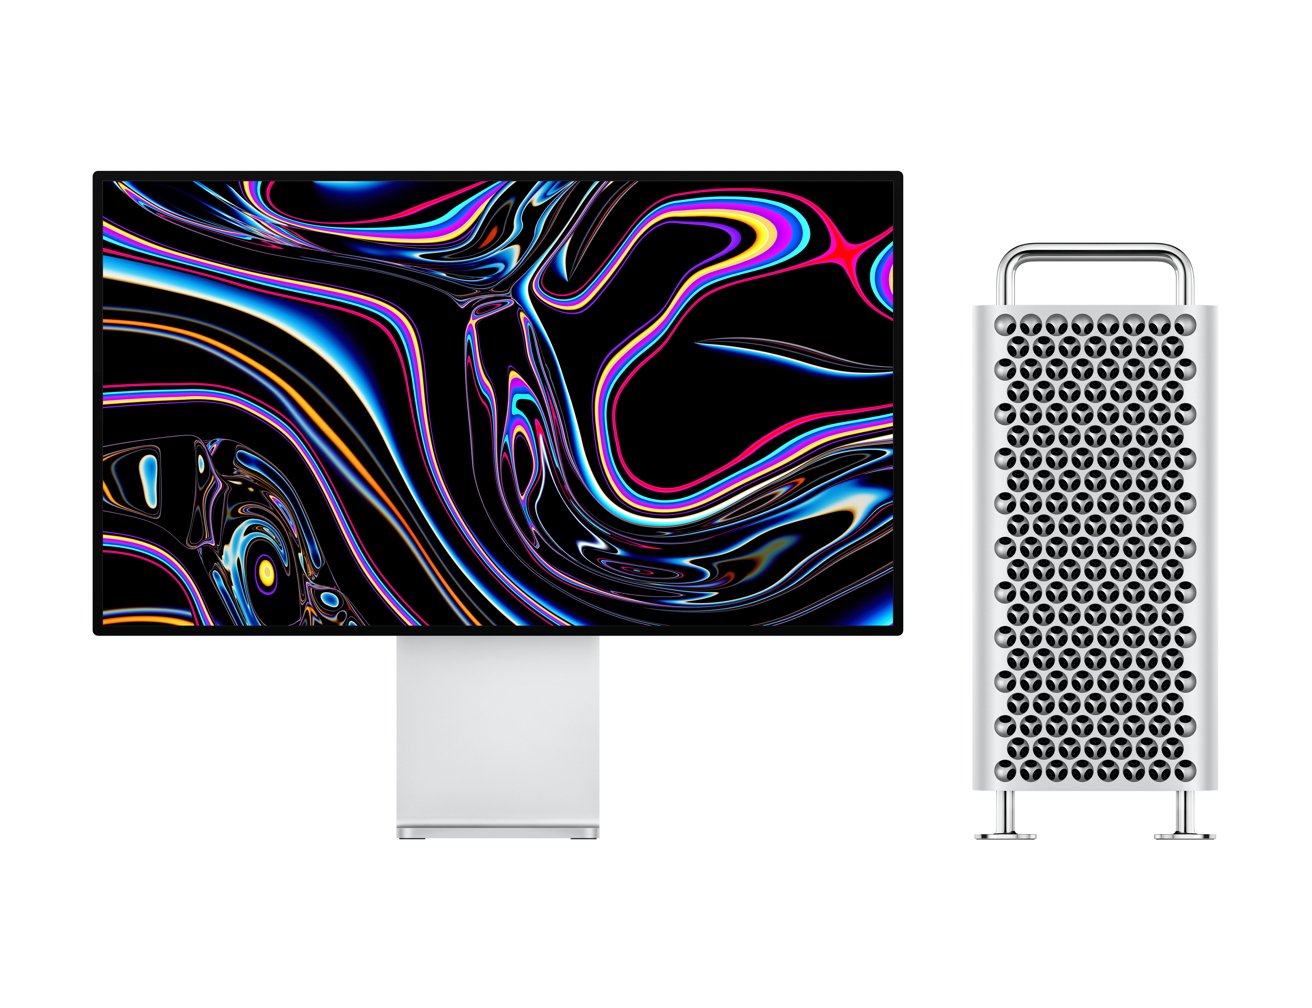 The Mac Pro is substantial in size, with its signature heat-managing frontage. 